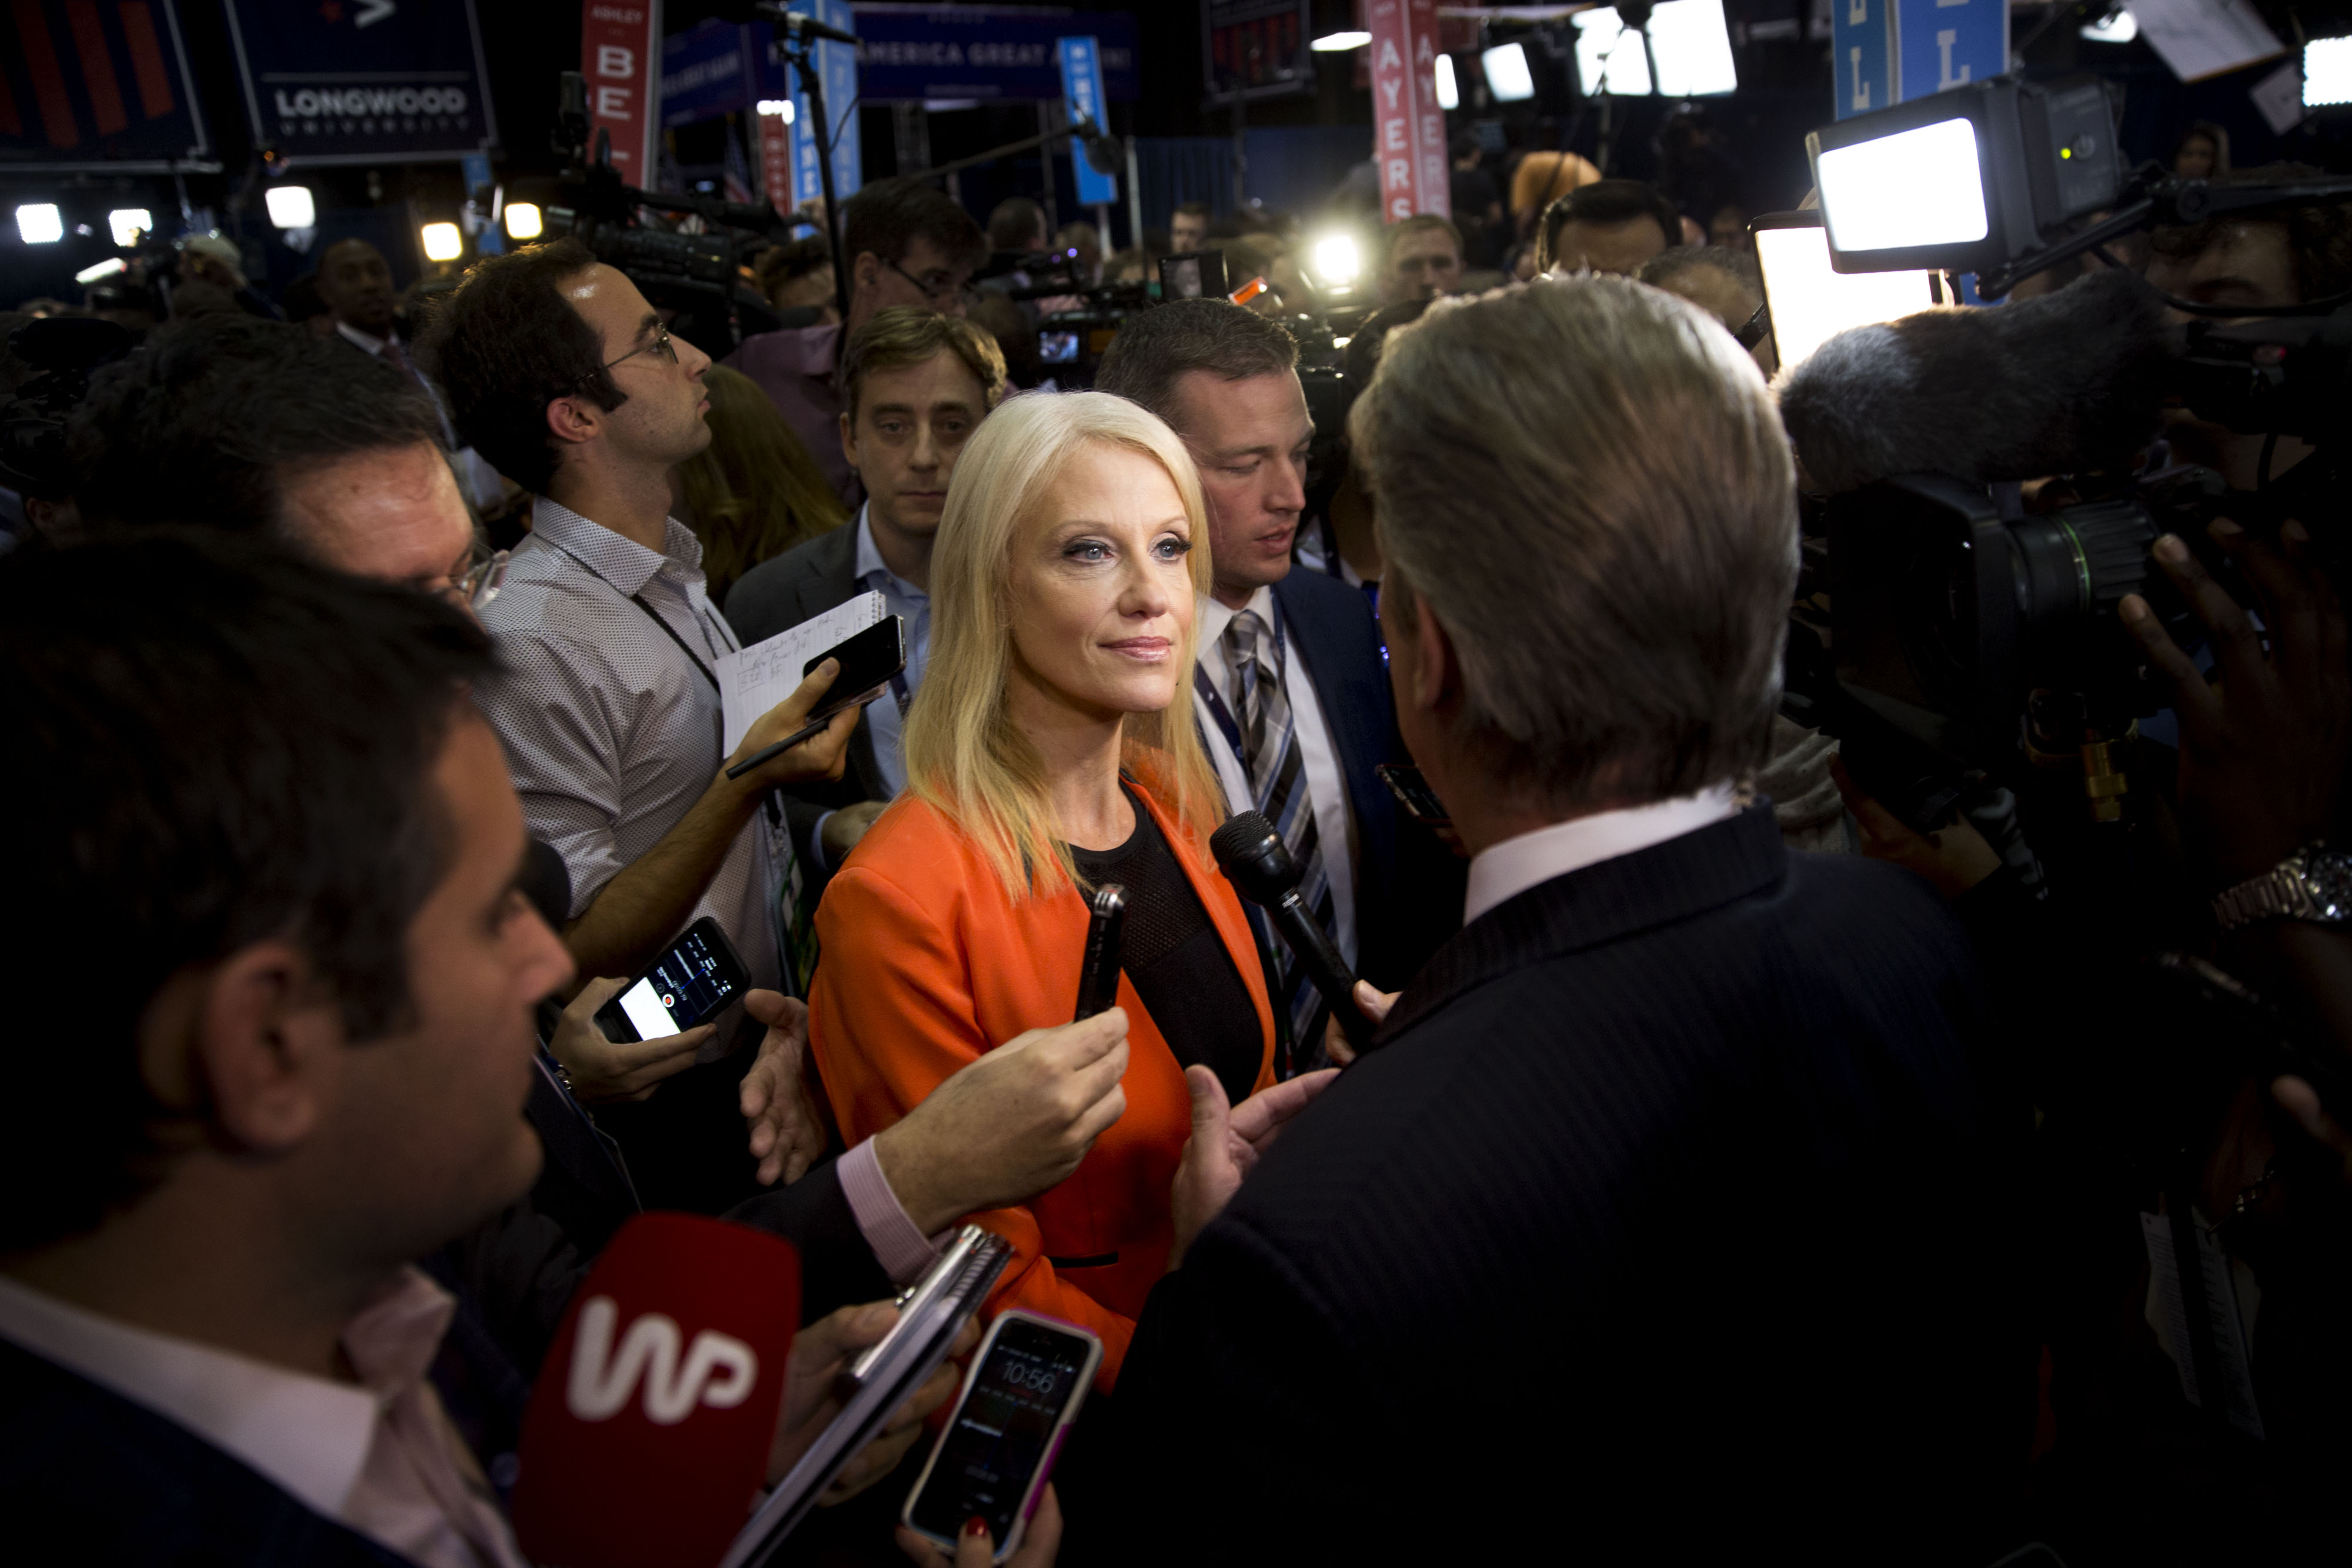 Kellyanne Conway, campaign manager for 2016 Republican Presidential Nominee Donald Trump, speaks to the media following the vice presidential debate at Longwood University in Farmville, Virginia, U.S., on Tuesday, Oct. 4, 2016. Indiana Governor Mike Pence and Virginia Senator Tim Kaine arrive at tonight's debate with three main assignments: defend their bosses from attack, try to land a few blows, and avoid any mistakes showing them unfit to be president. Photographer: Daniel Acker/Bloomberg via Getty Images (aniel Acker/—Bloomberg /Getty Images)